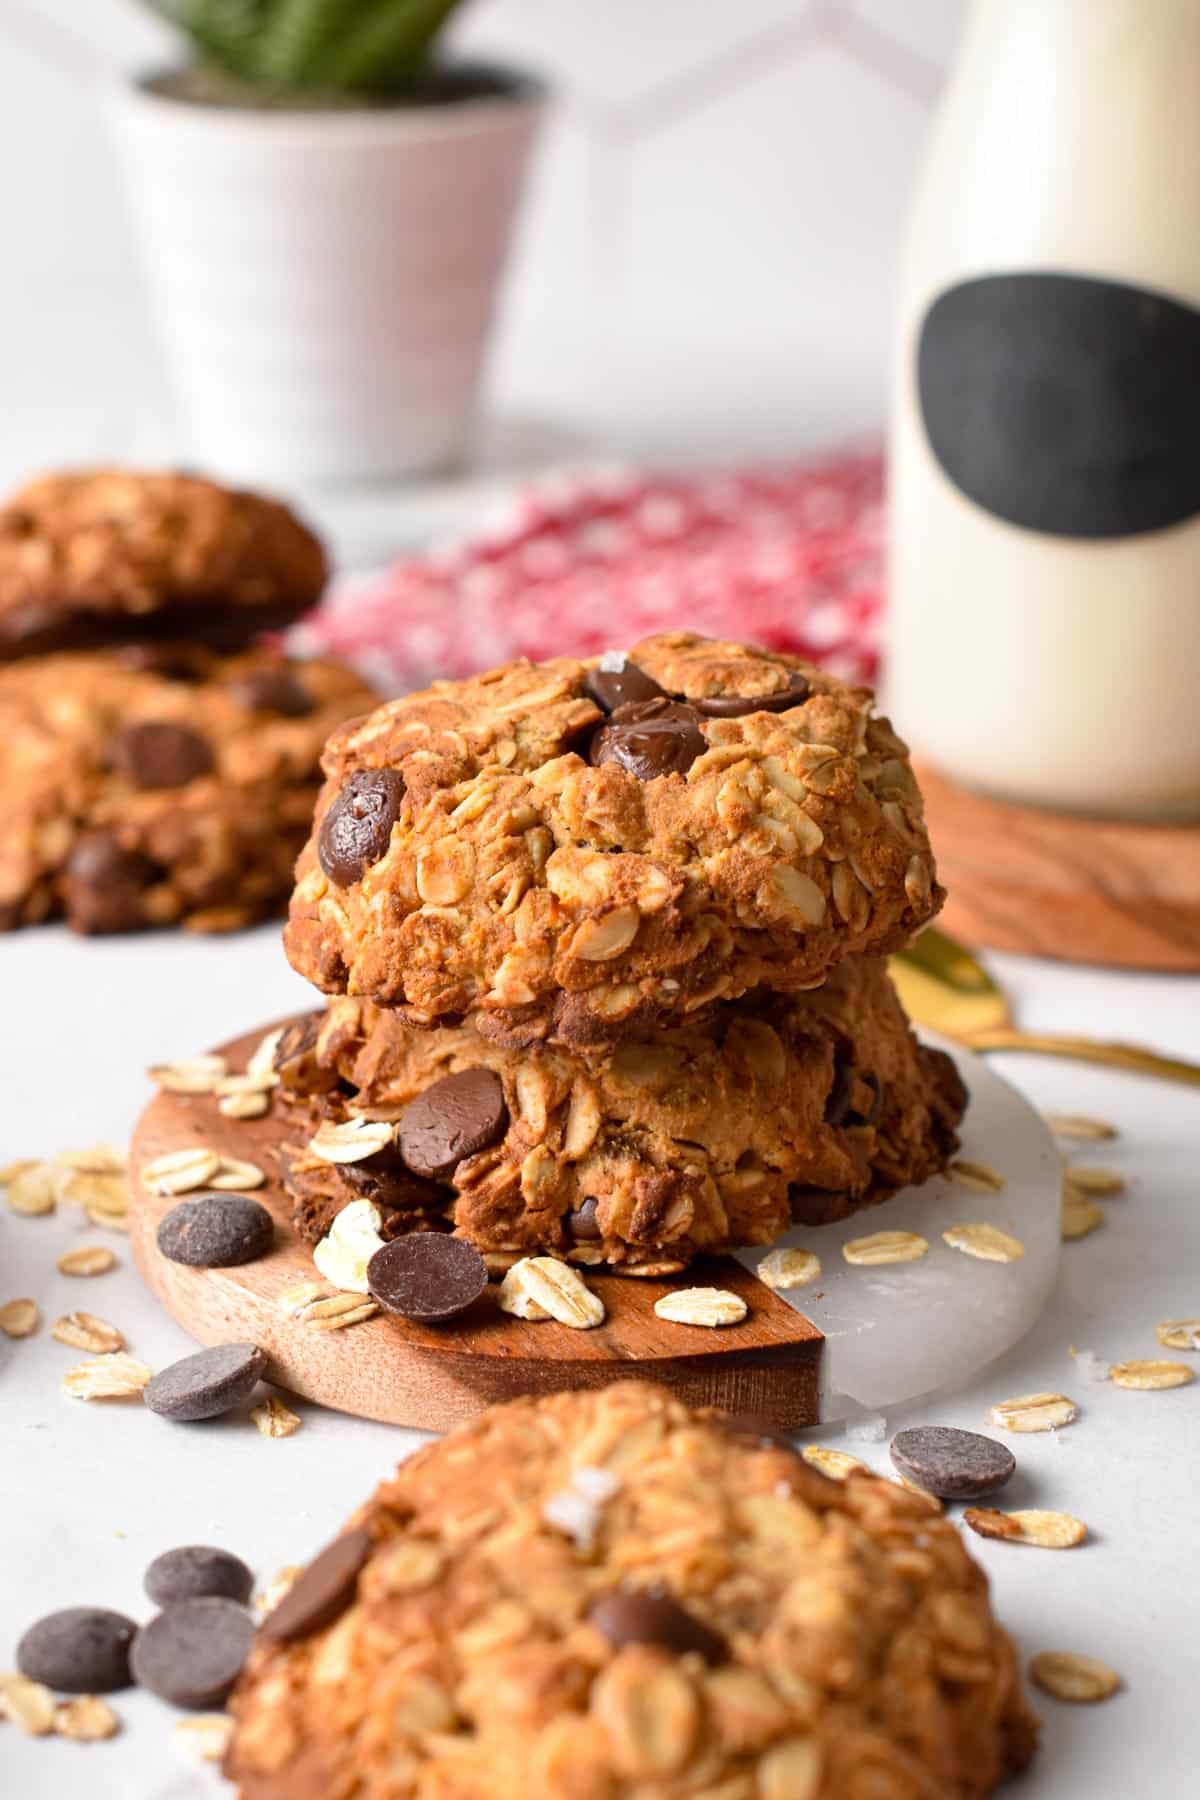 These Protein Oatmeal Cookies are easy oatmeal cookies packed with 14 grams of protein and a delicious banana, peanut butter, and chocolate flavorThese Protein Oatmeal Cookies are easy oatmeal cookies packed with 14 grams of protein and a delicious banana, peanut butter, and chocolate flavor